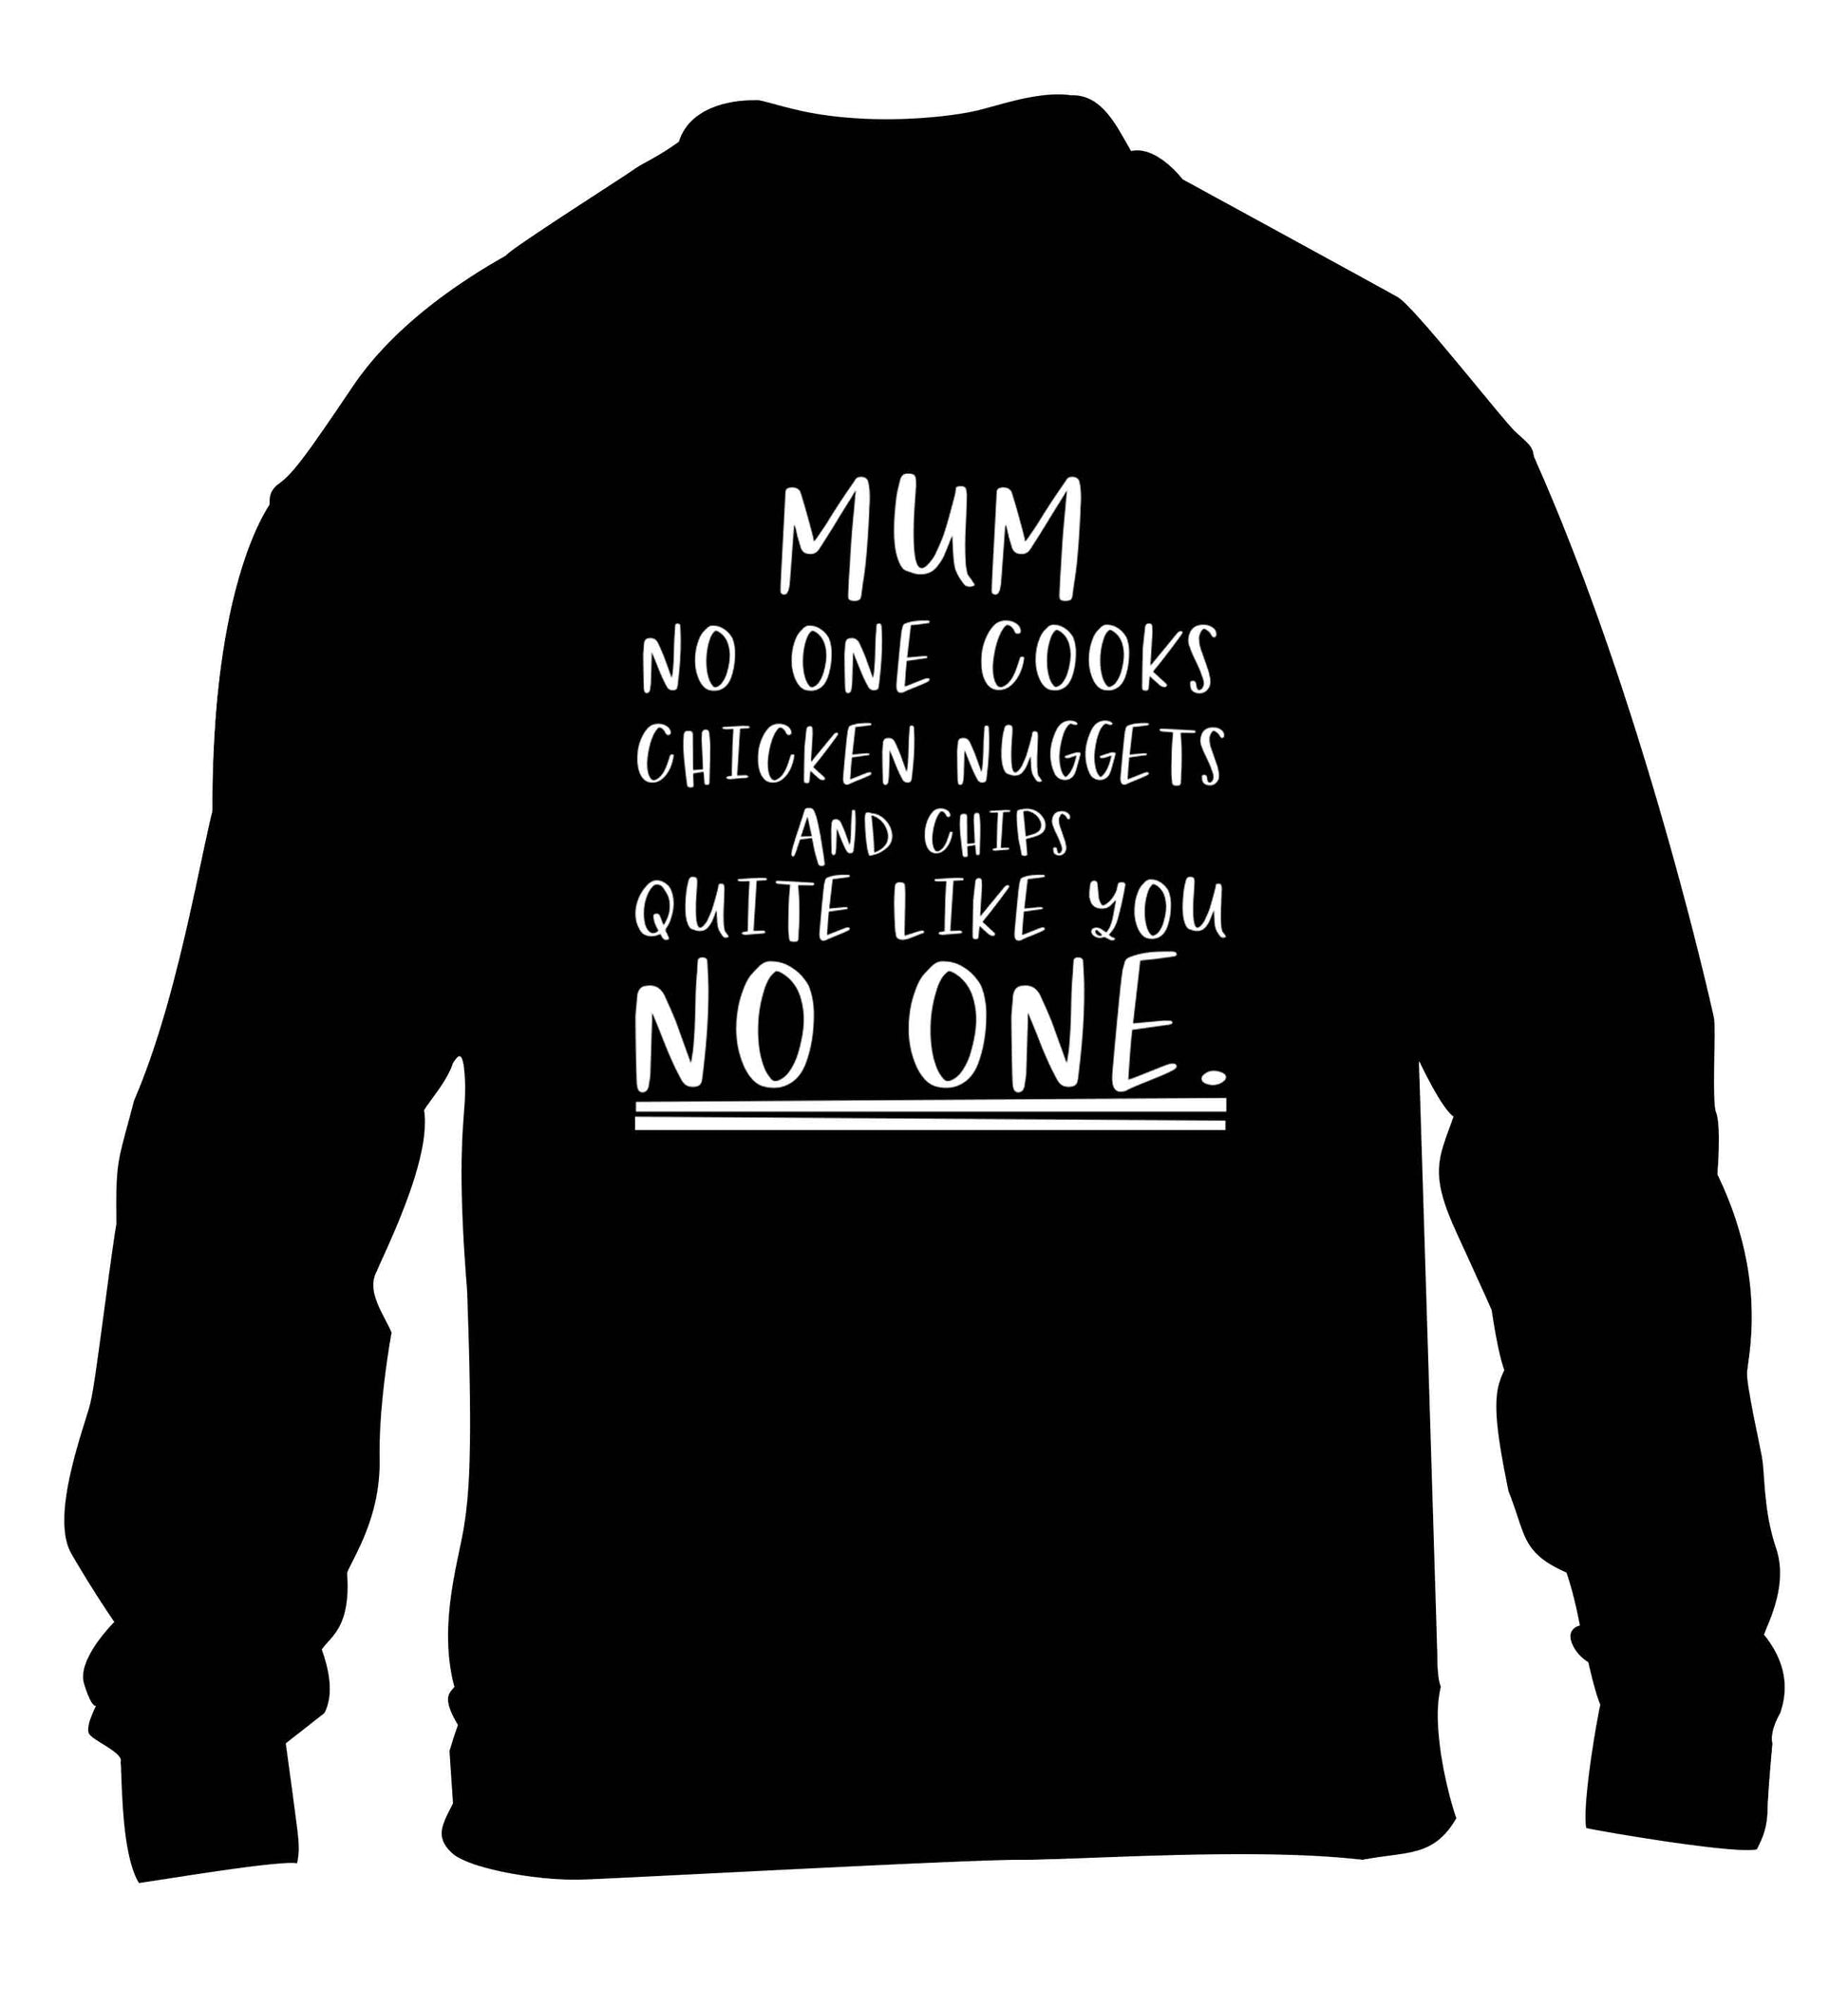 Super funny sassy gift for mother's day or birthday!  Mum no one cooks chicken nuggets and chips like you no one children's black sweater 12-13 Years